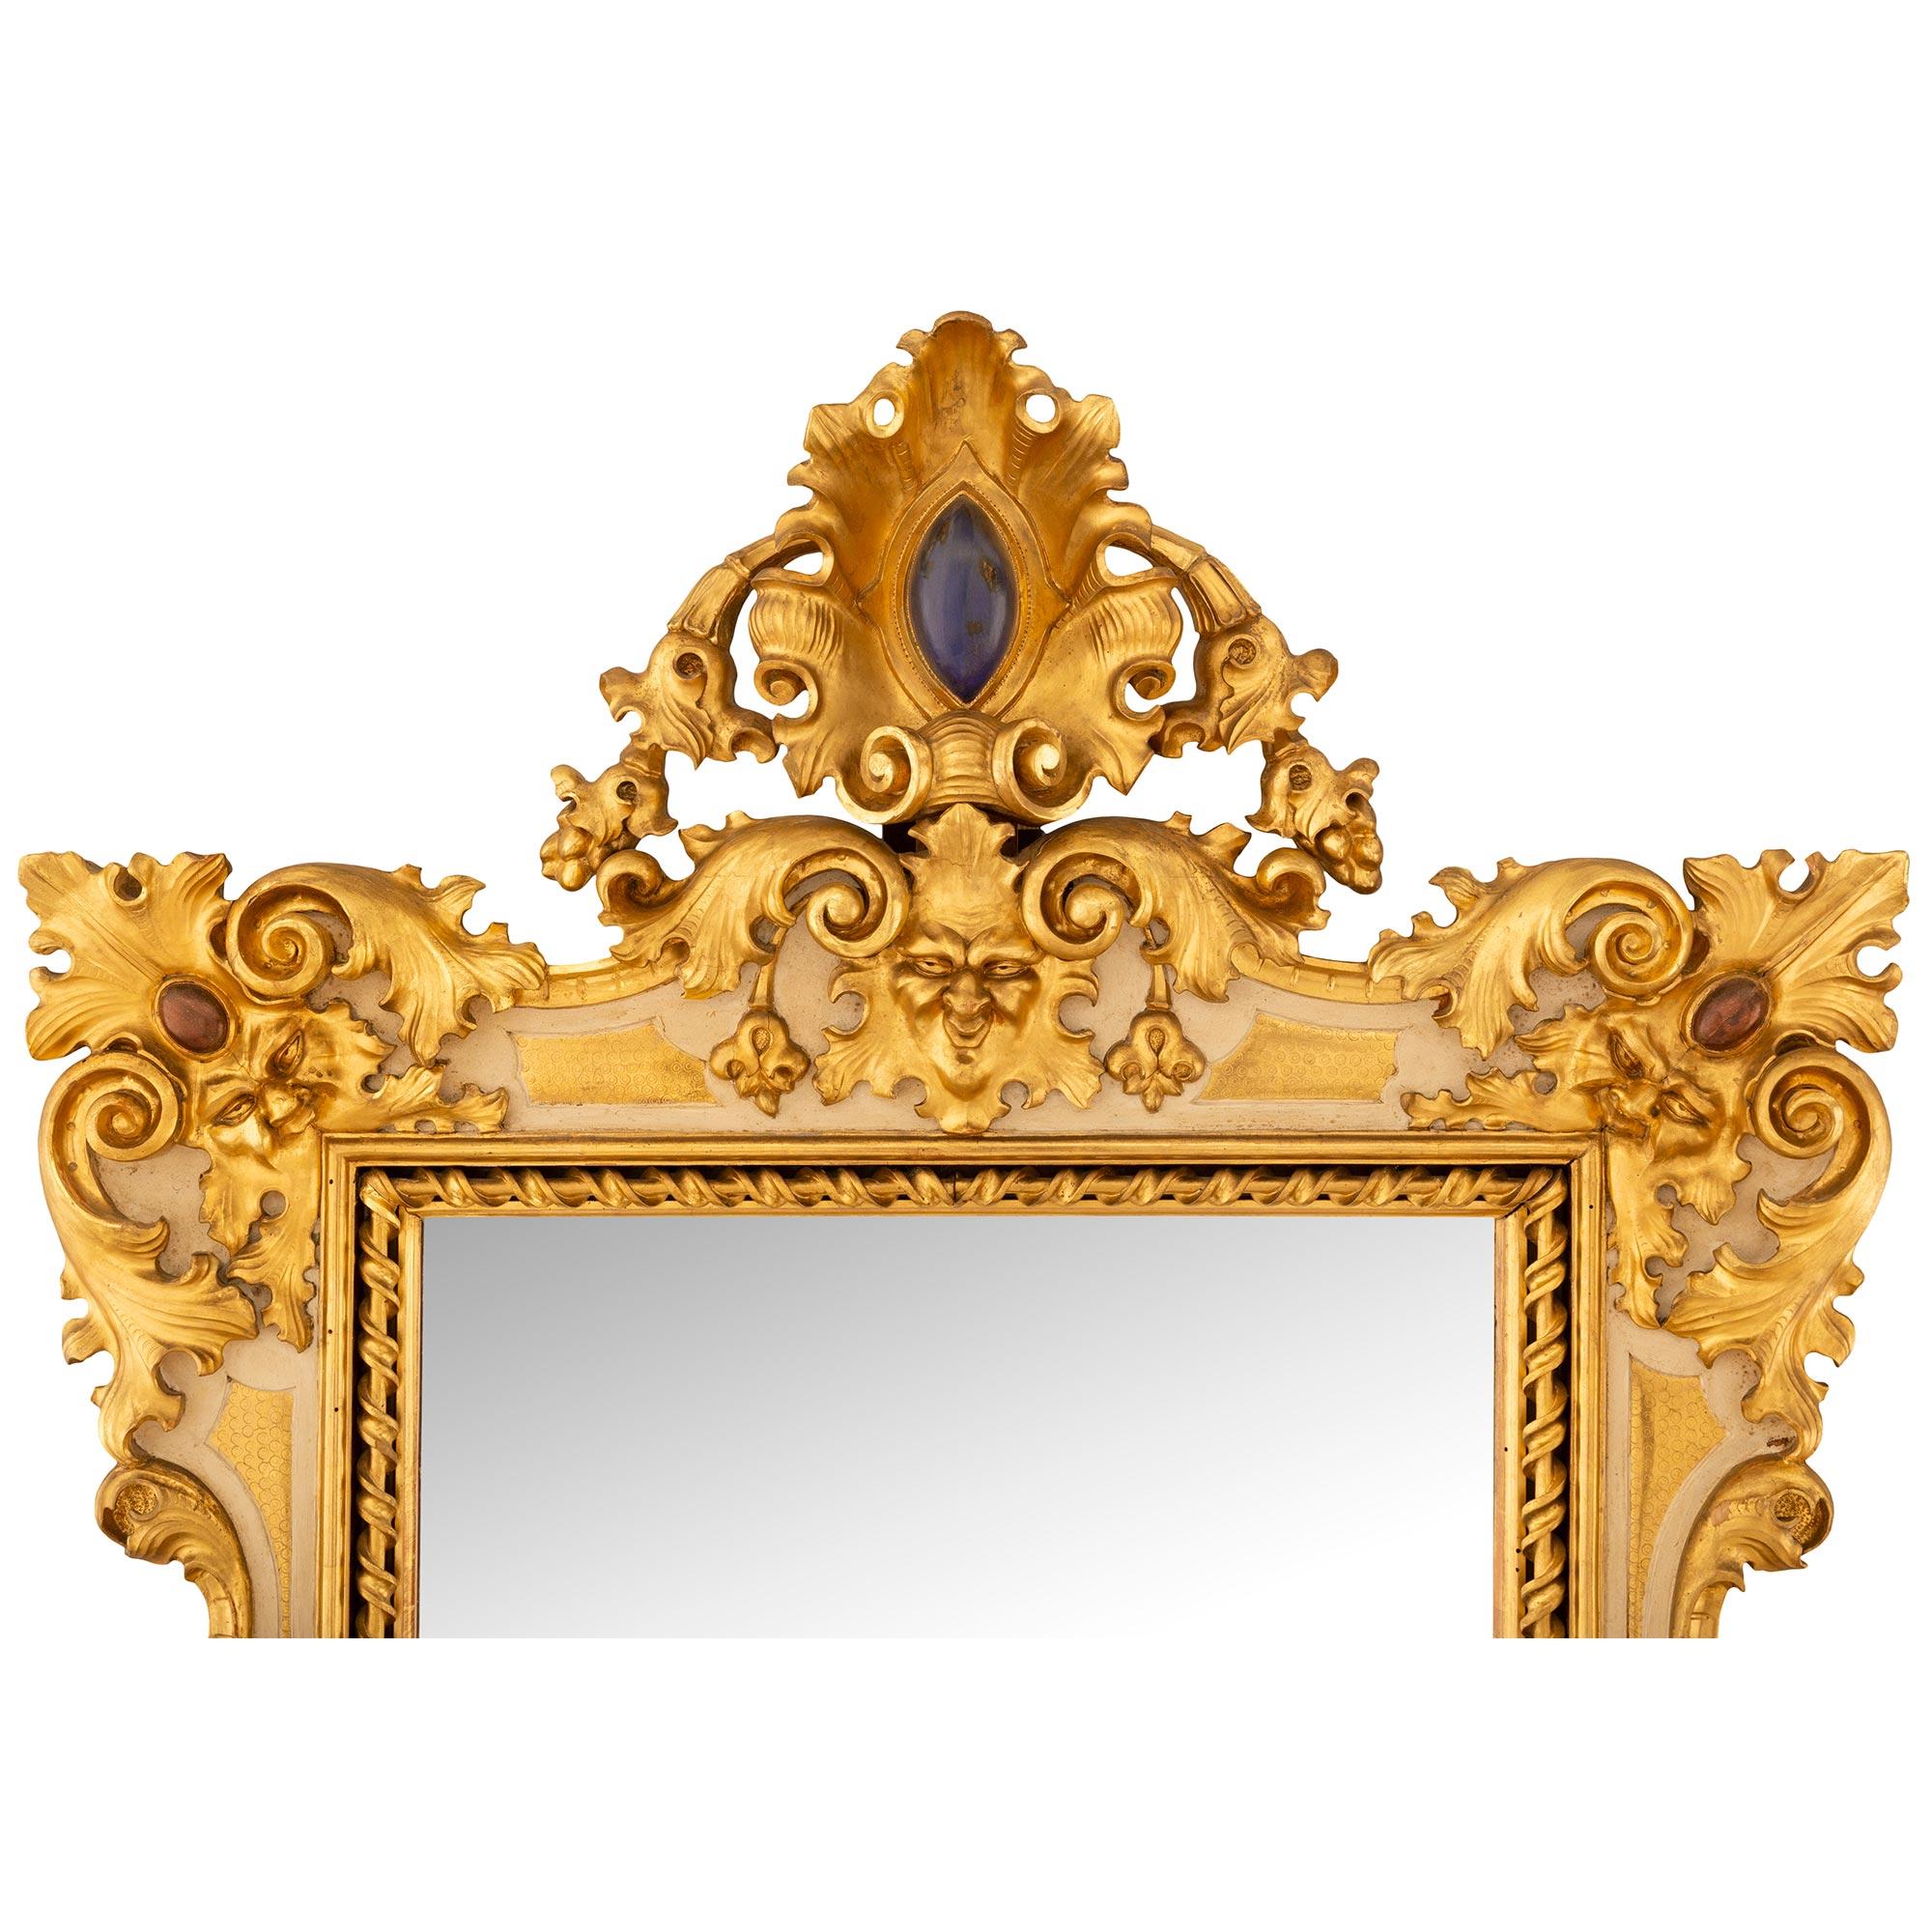 A most decorative and unique Italian 19th century Baroque st. patinated wood and Giltwood mirror and planter. The mirror is raised on its stunning original planter base with mottled feet below a scalloped shaped frieze with a beautiful Giltwood